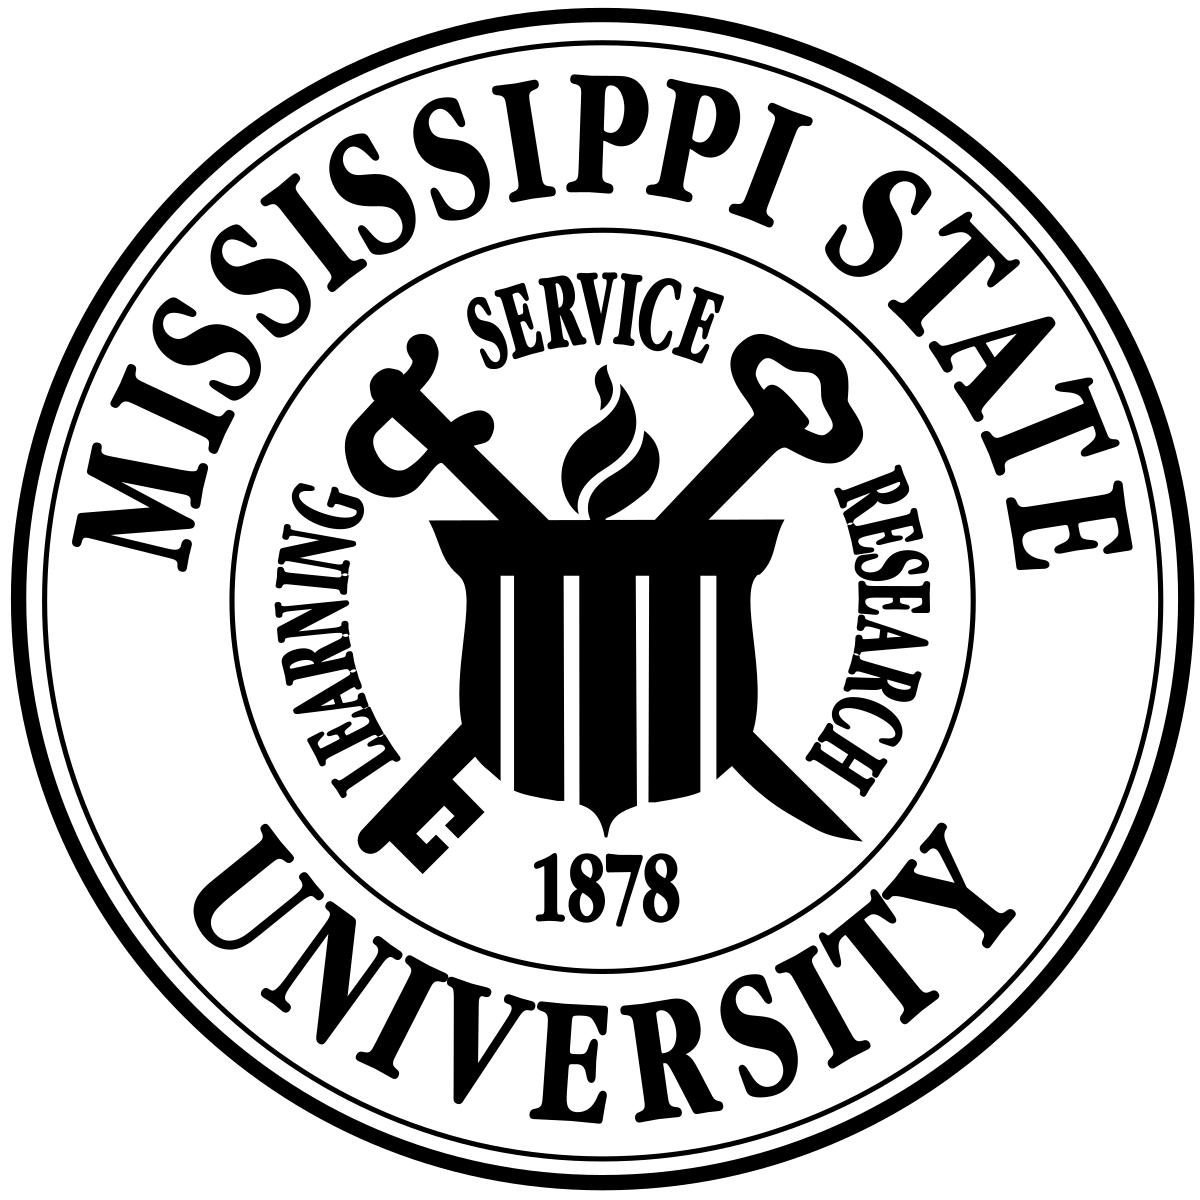 mississippi state online phd engineering